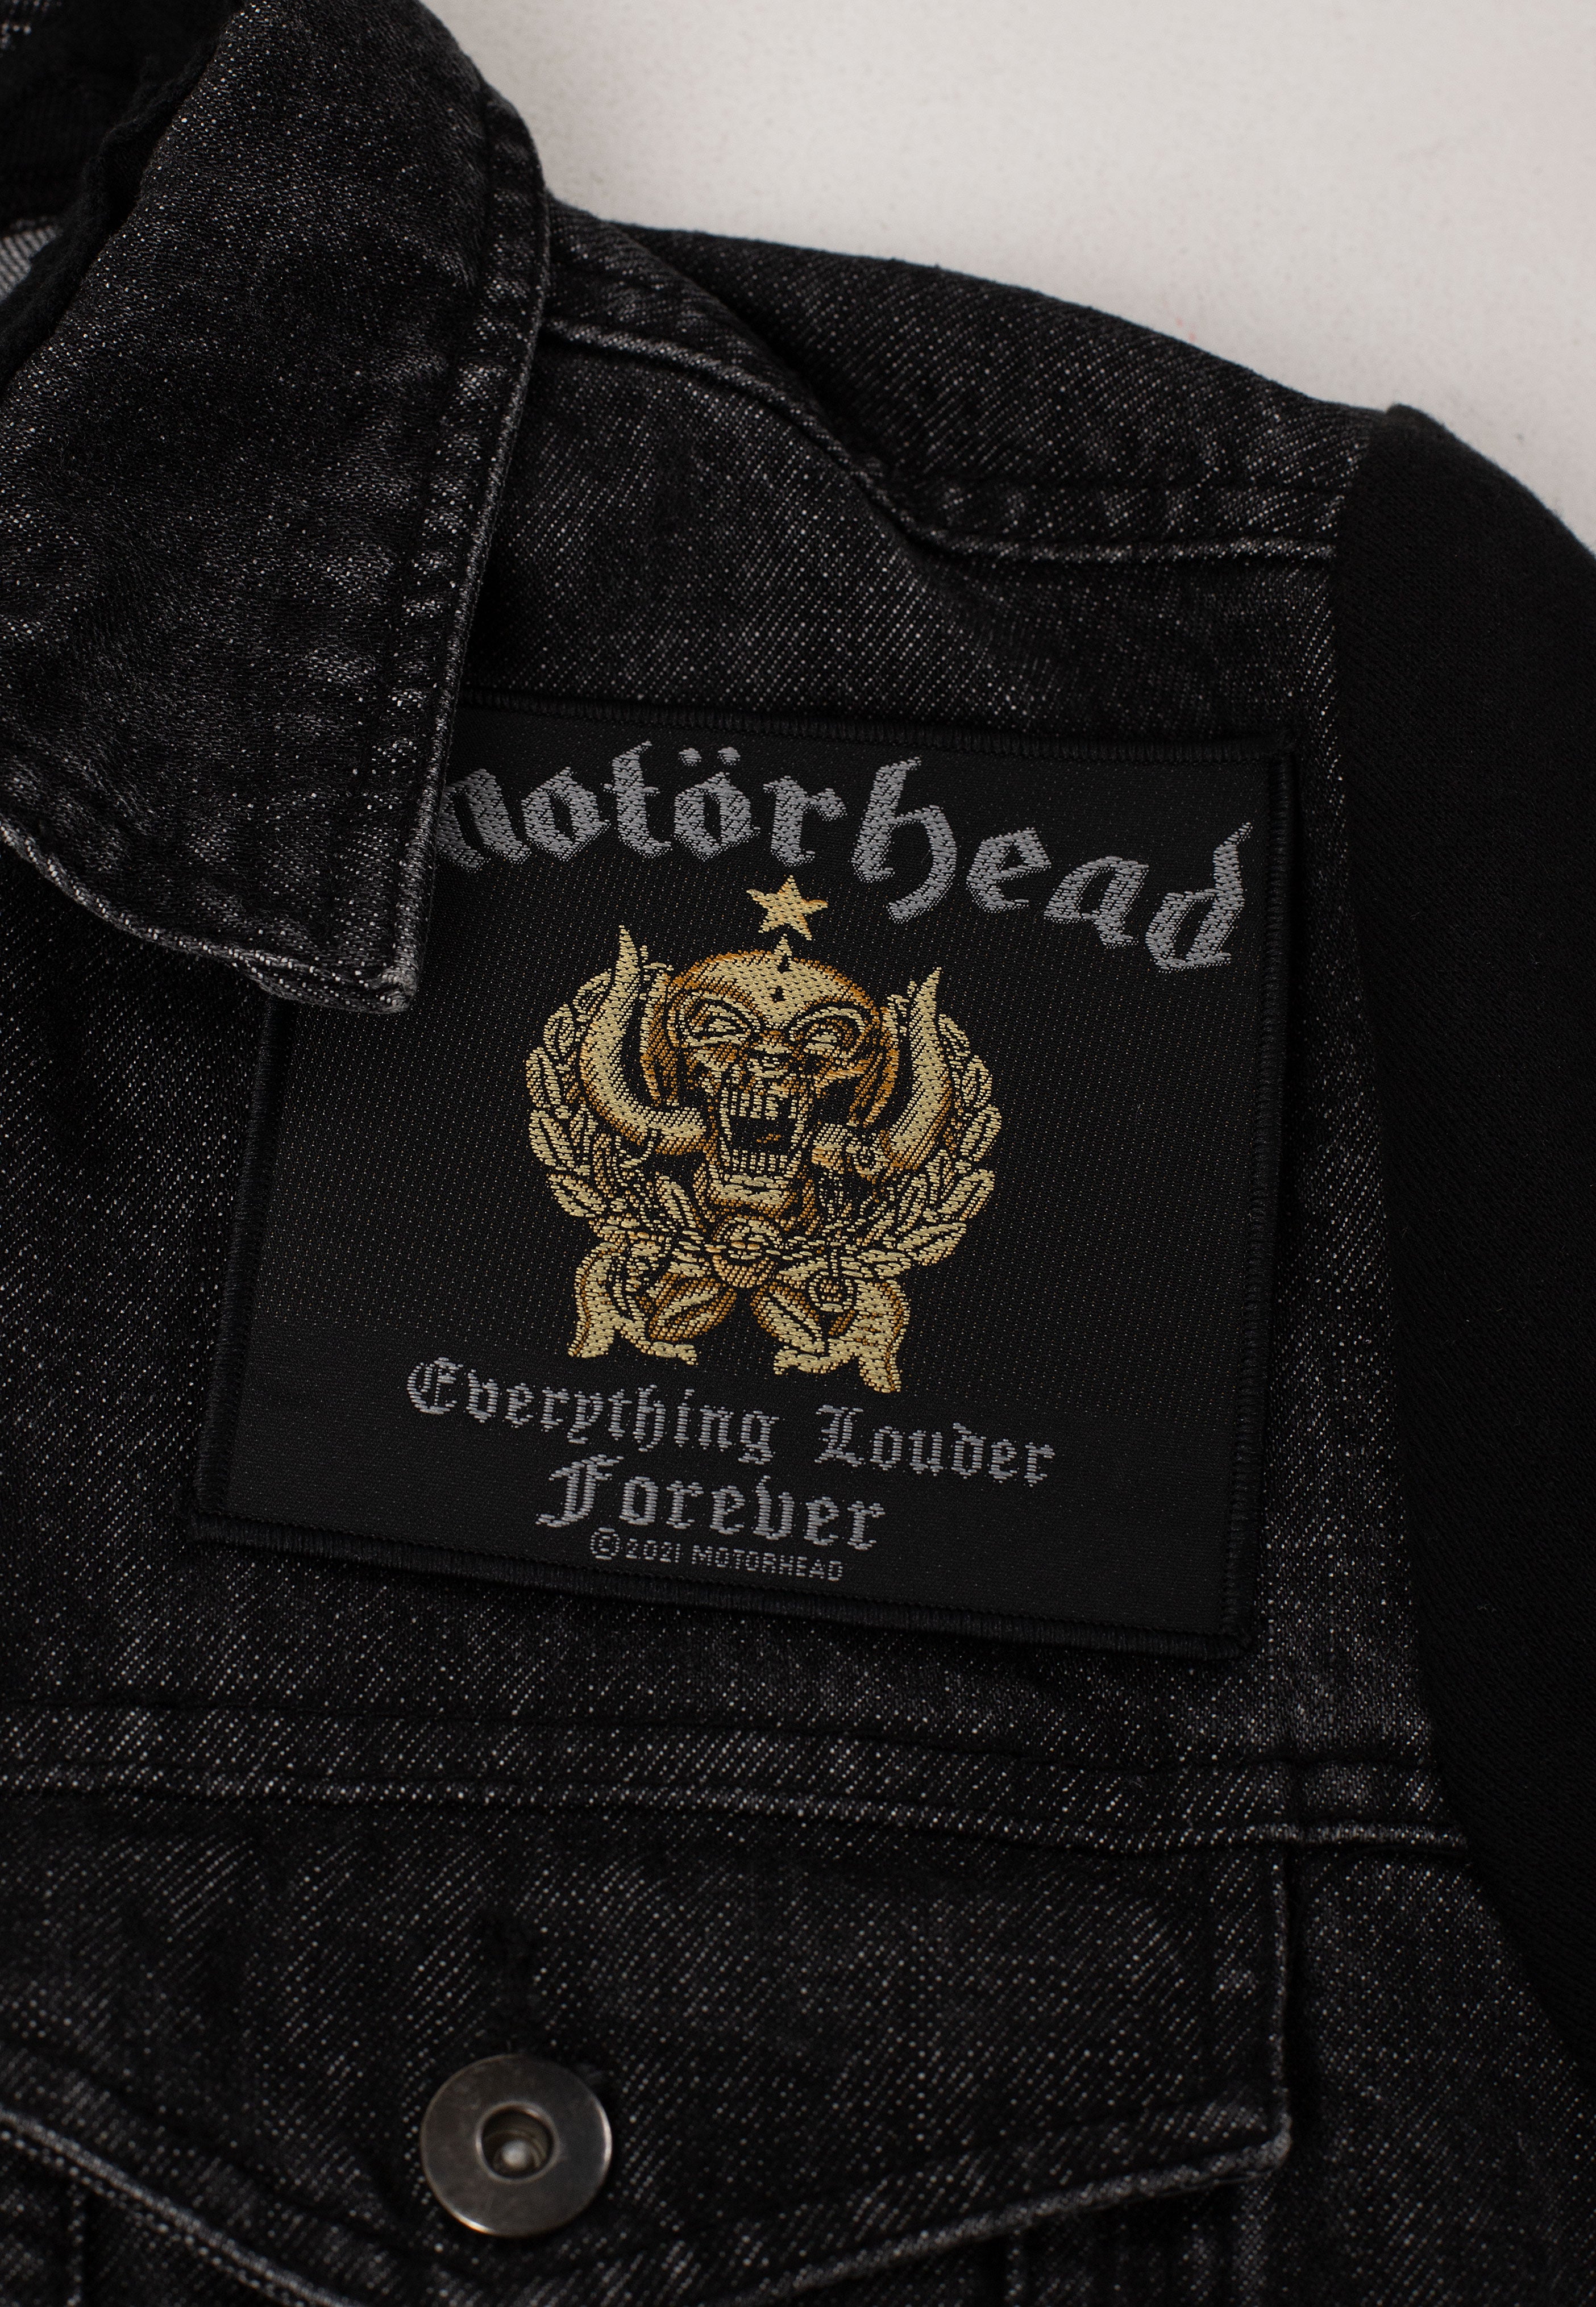 Motörhead - Everything Louder Forever - Patch